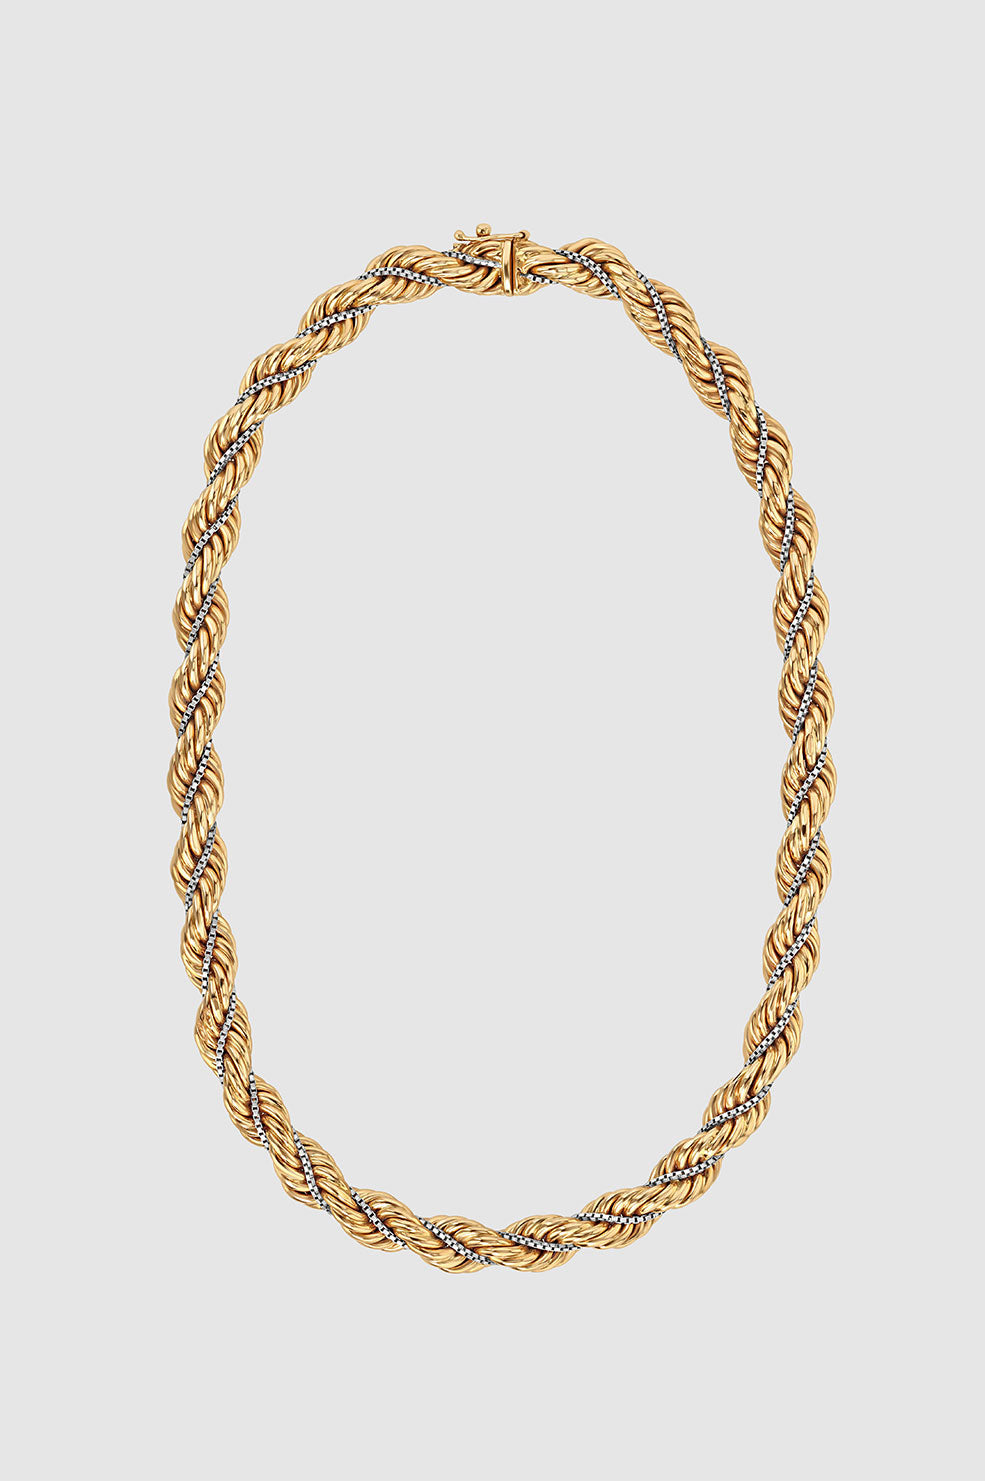 ANINE BING Rope Twist Necklace - 14k Gold - Front View